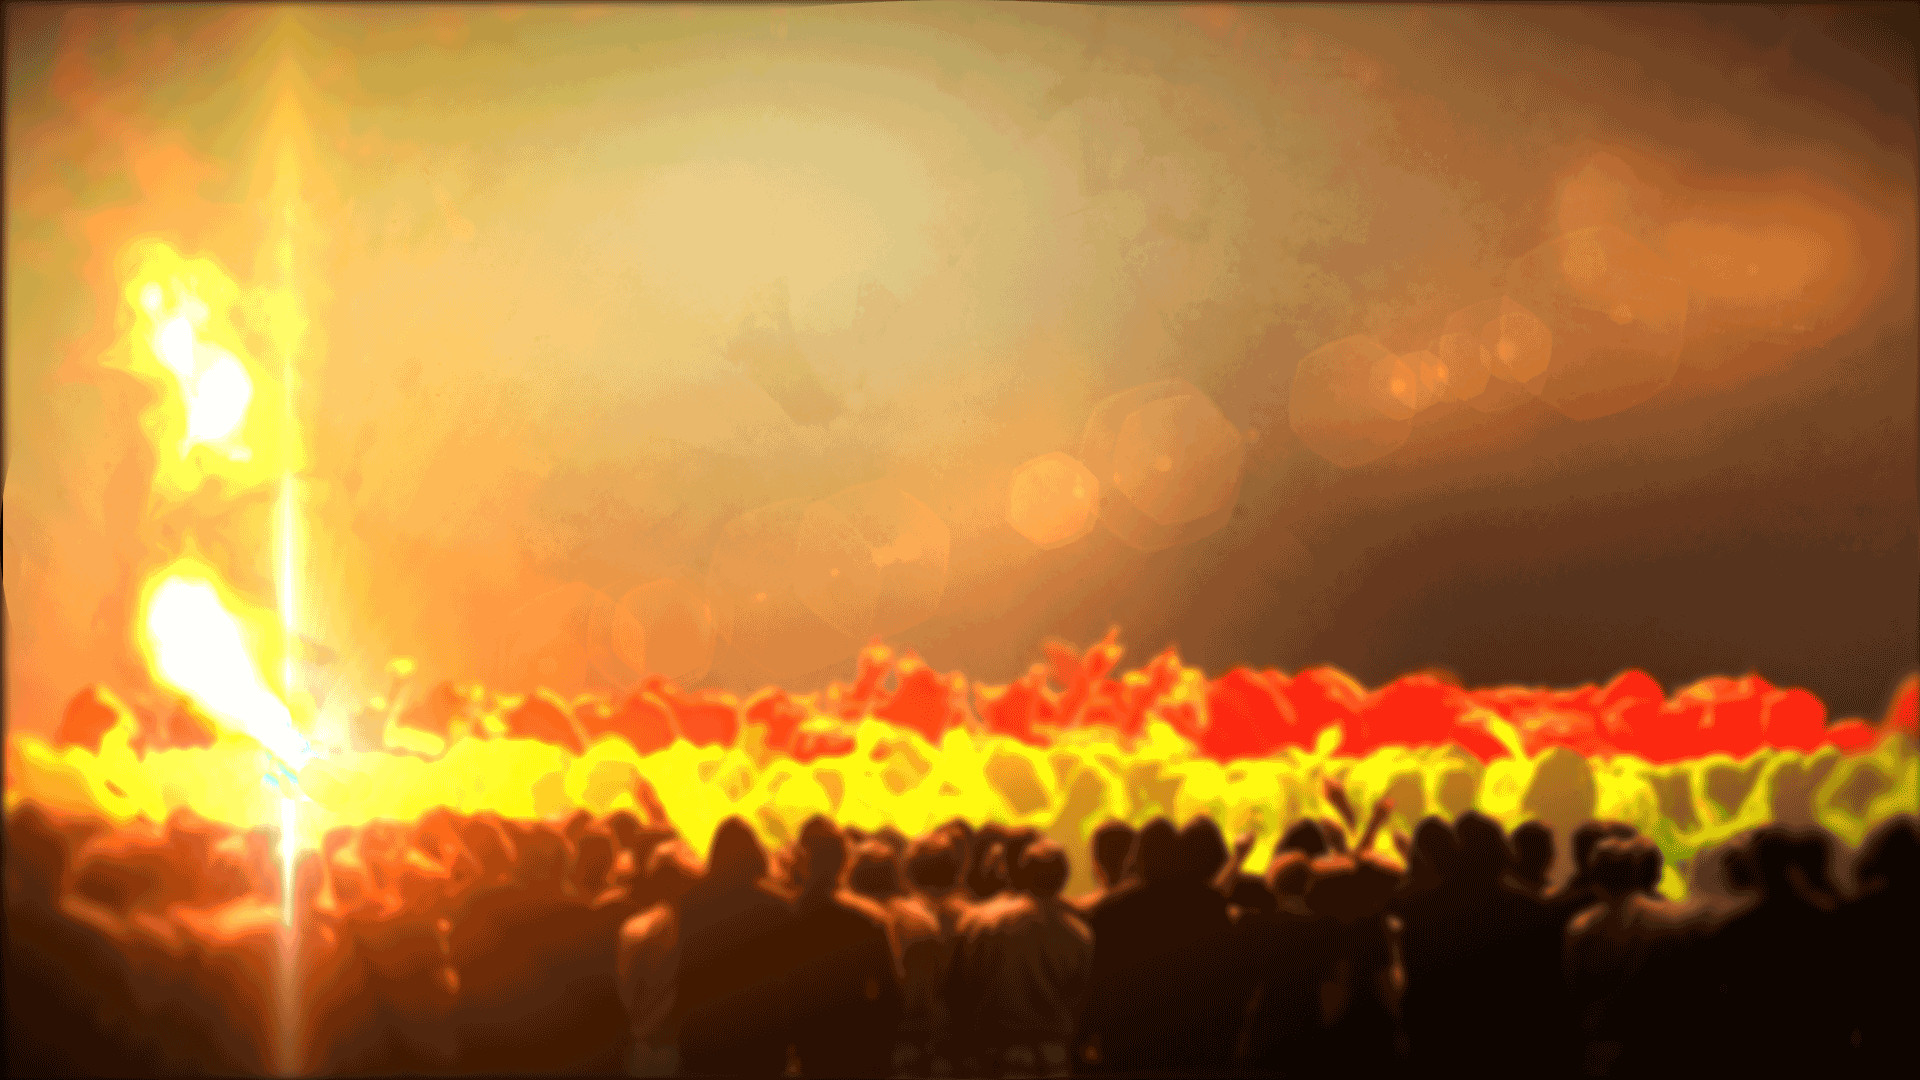 At Pentecost, The Glory Of God Descended On His Followers - Pentecost Holy Spirit Background - HD Wallpaper 